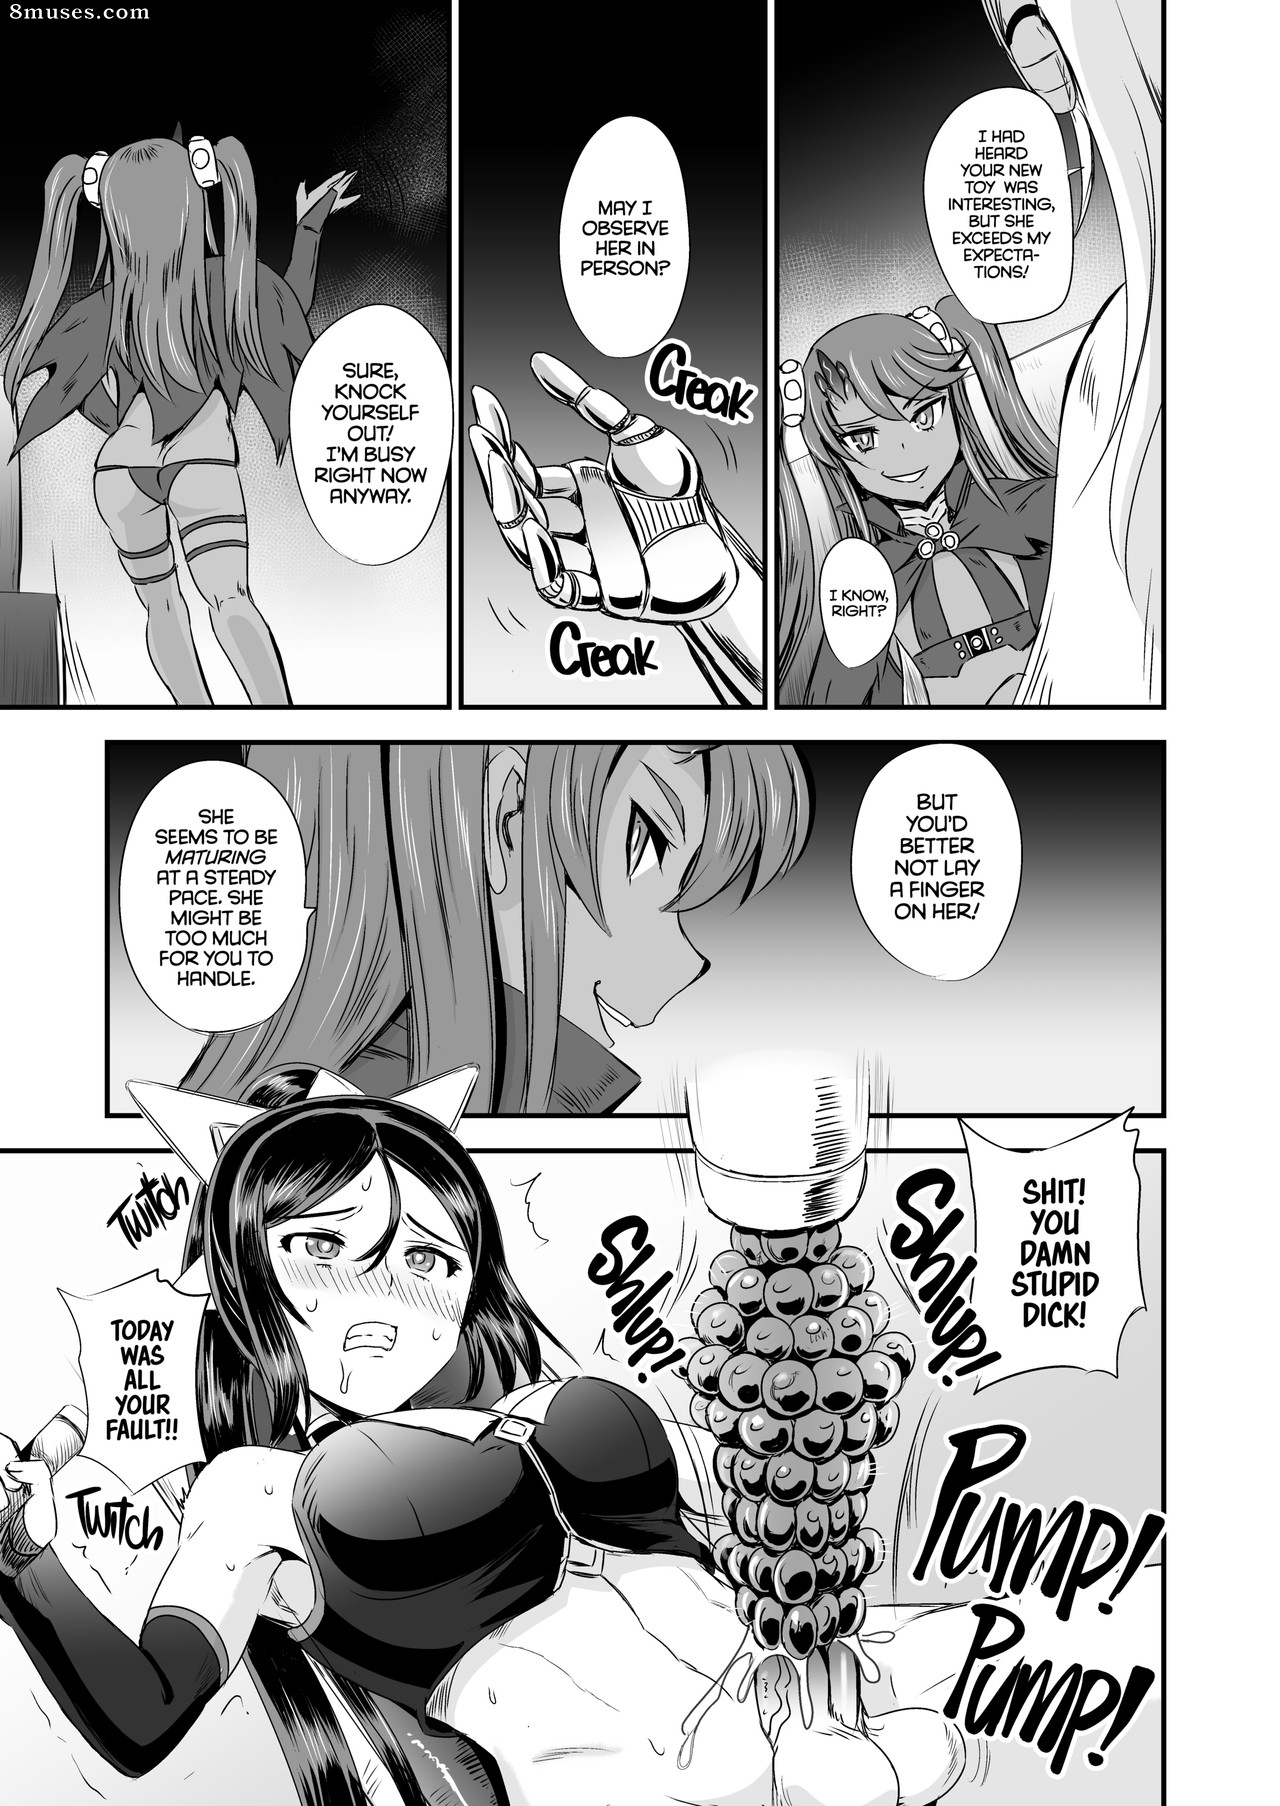 Page 6 Fakku-Comics/PX-Real-Kanno-Takashi/Magical-Girl-Semen-Training-System/Issue-3 8muses